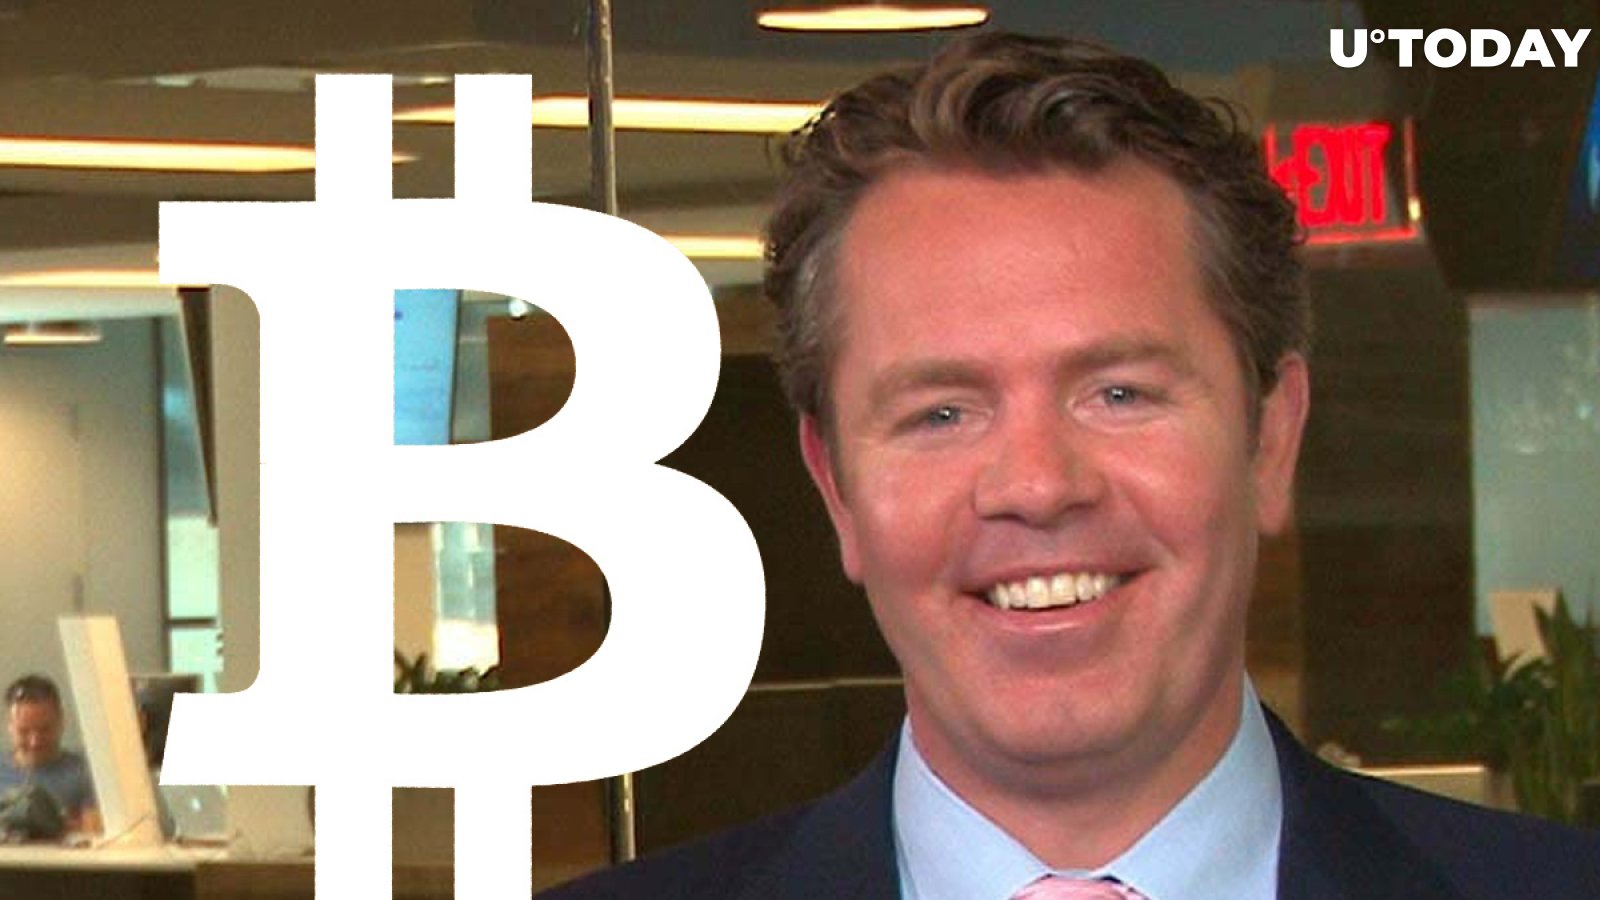 Long-Term Bitcoin Holders Reloaded in October, Hedgeye CEO Says, Right Before BTC Rally Began